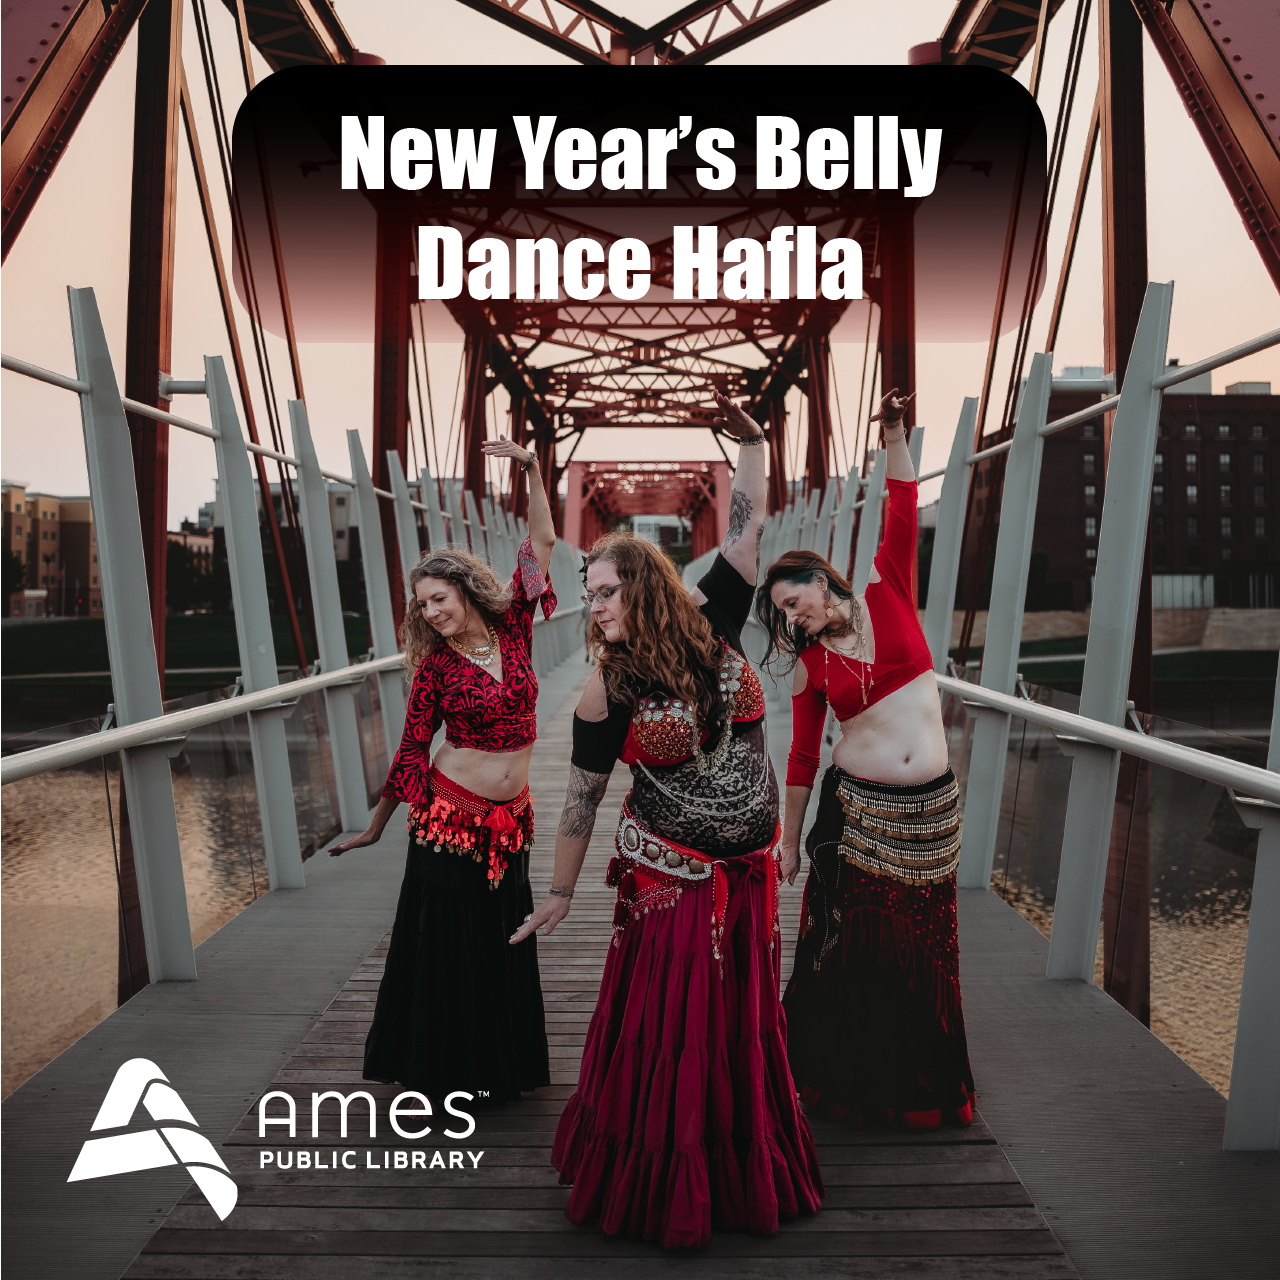 New Year's Belly Dance Hafla